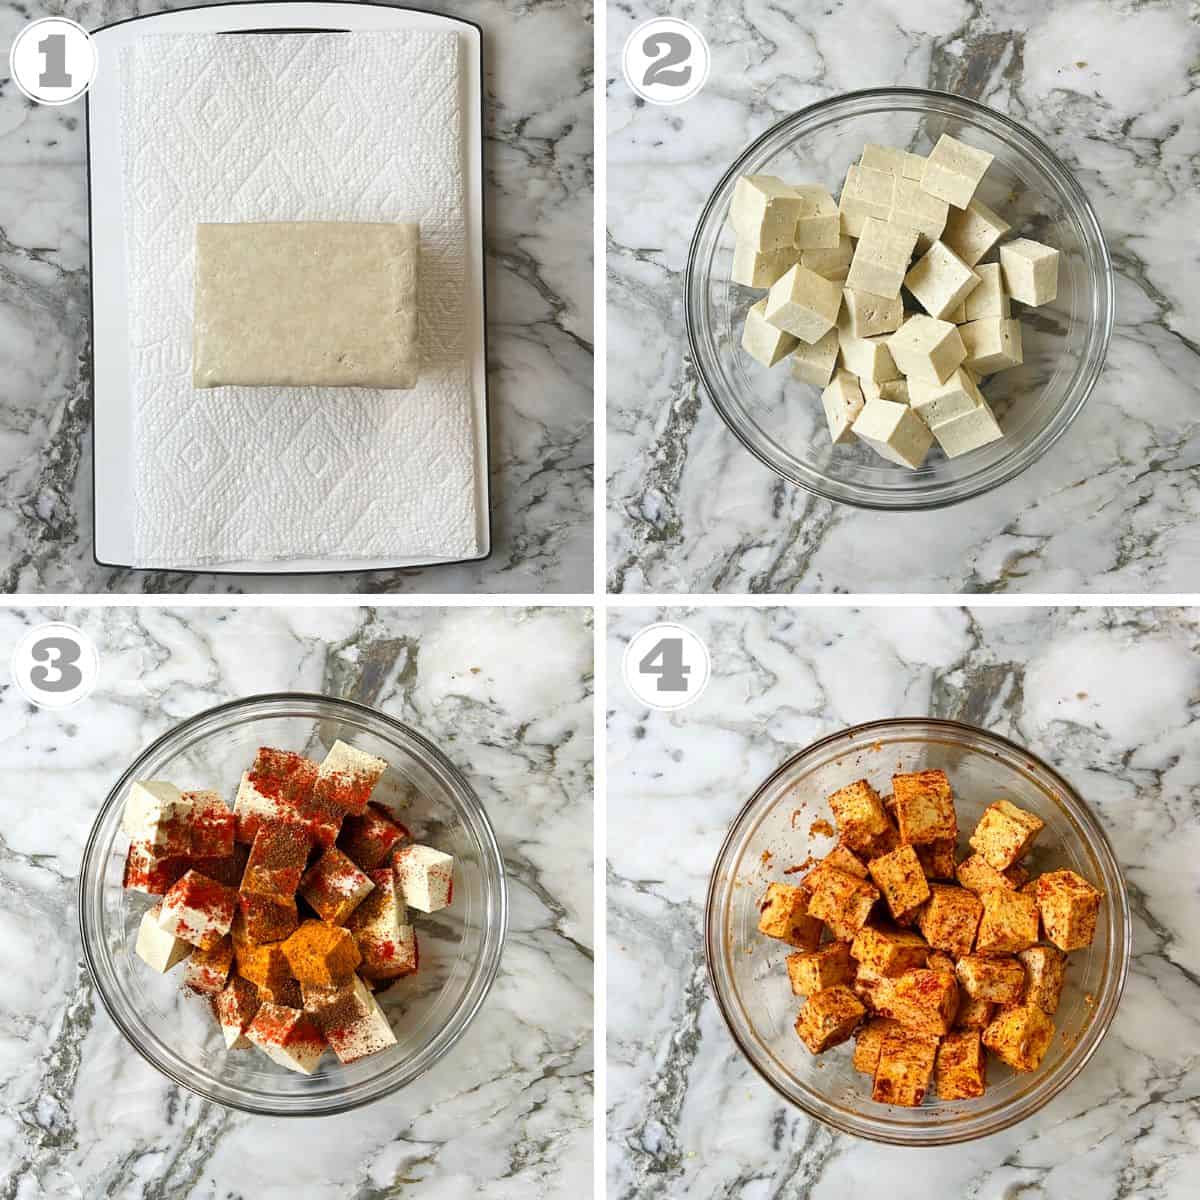 photos one through four showing how to marinate tofu with Indian spices 